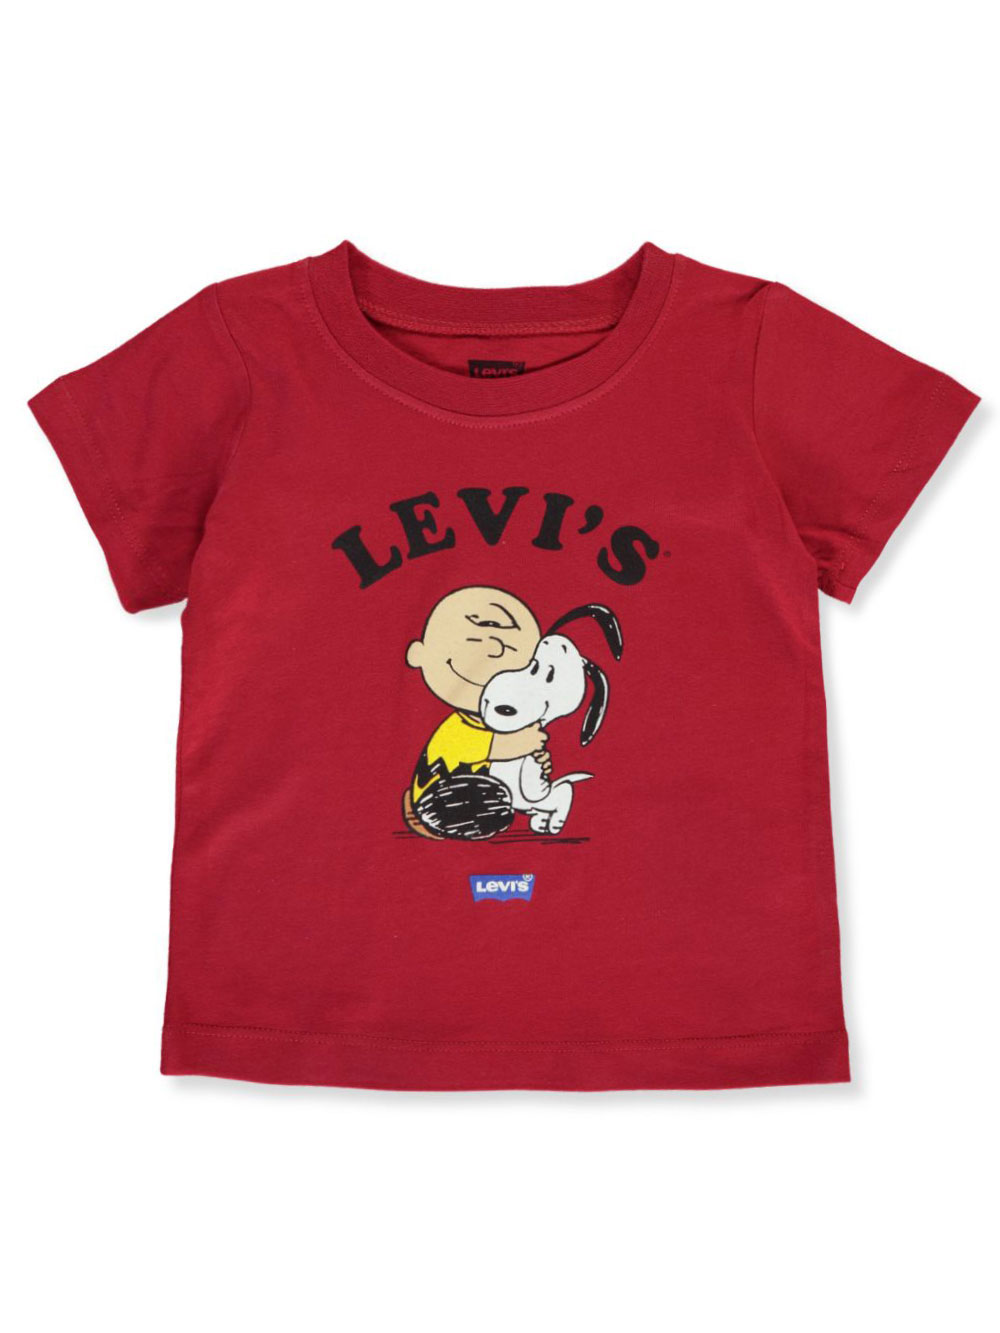 white and red levis t shirt